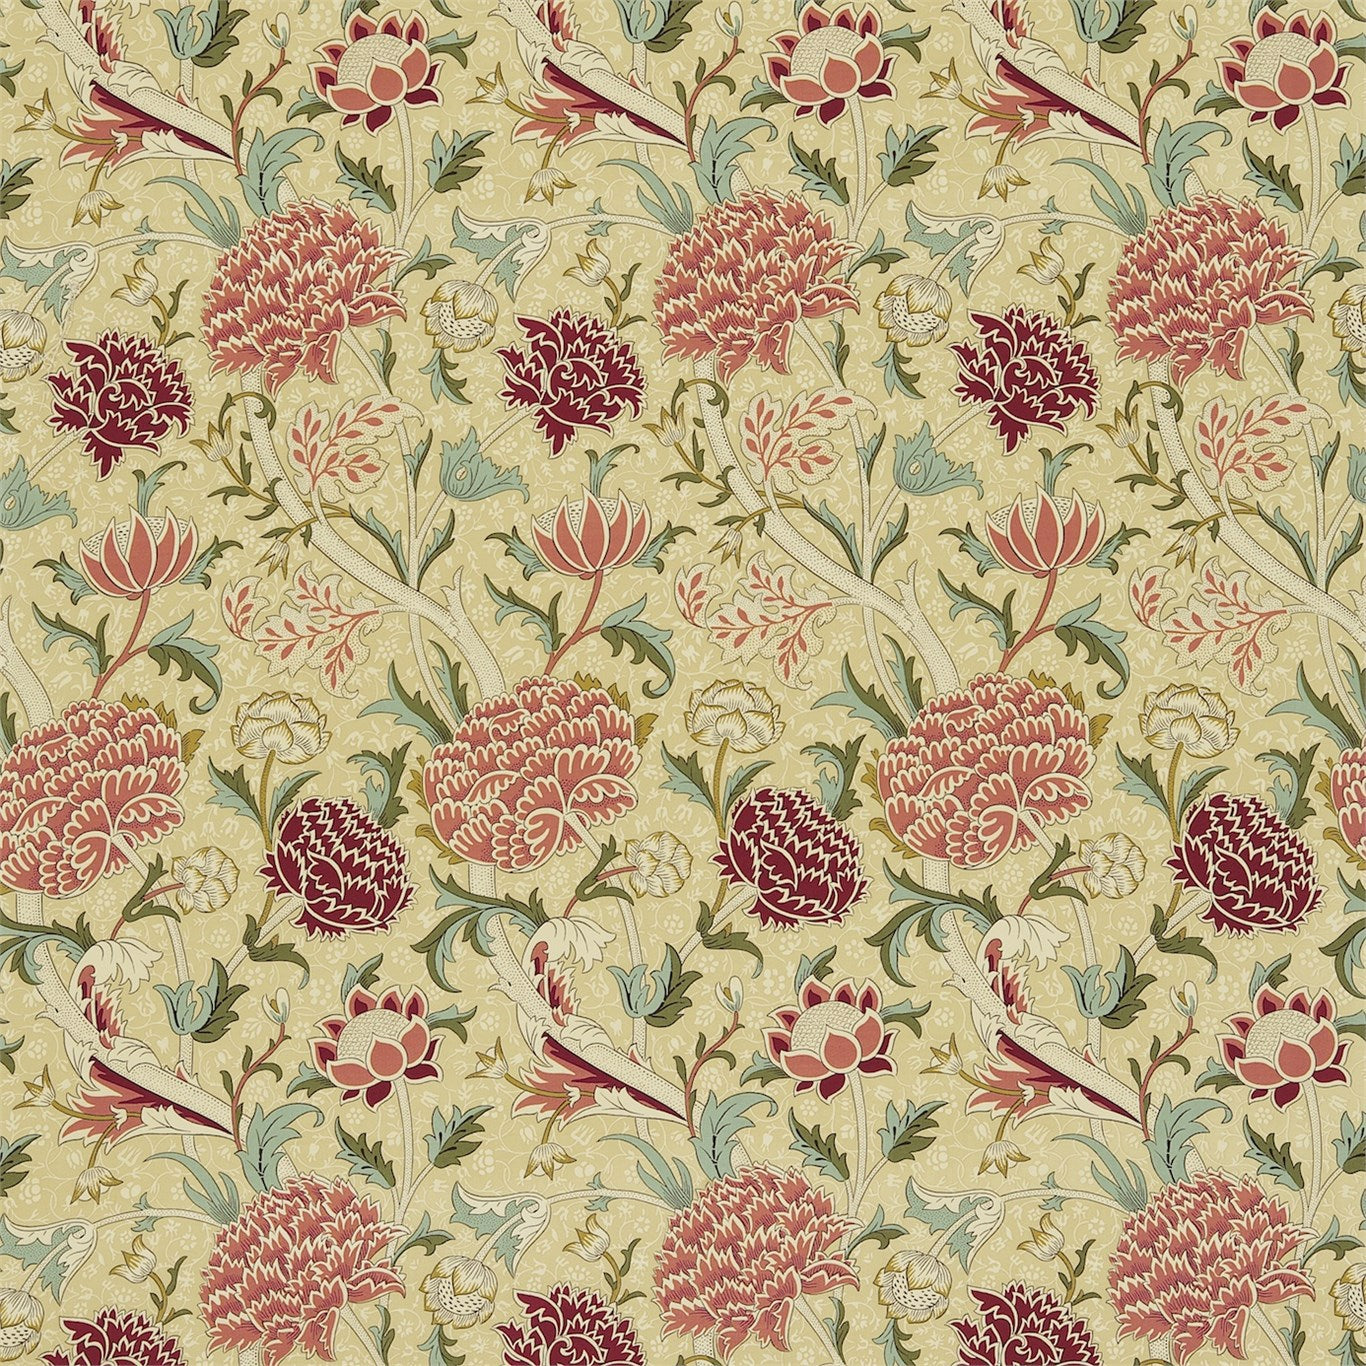 Cray Fabric by Morris & Co. - DMFPCR201 - Biscuit/Brick